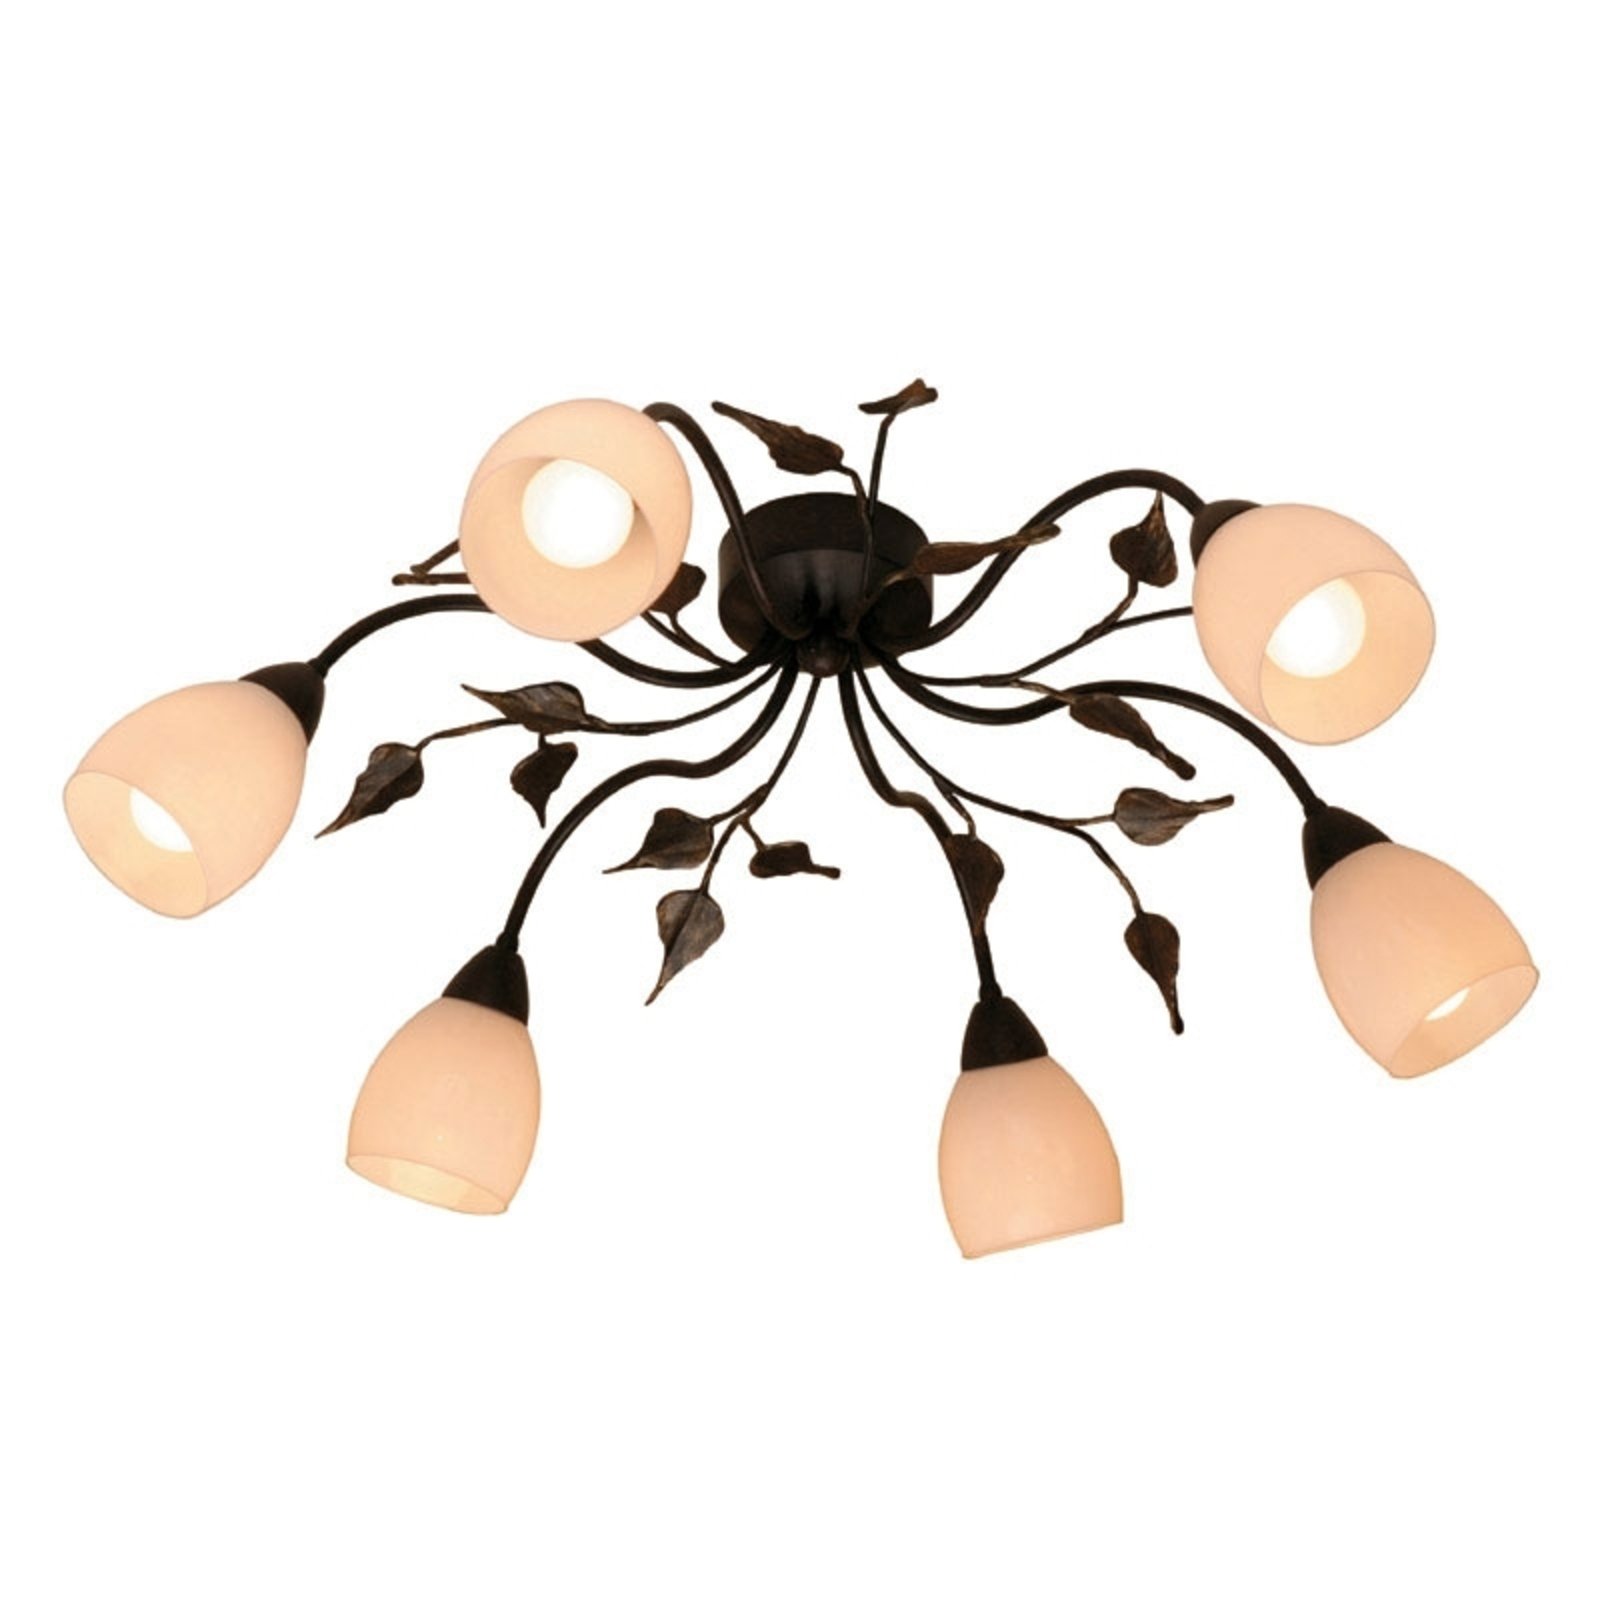 CHALET floral ceiling light with glass tulips